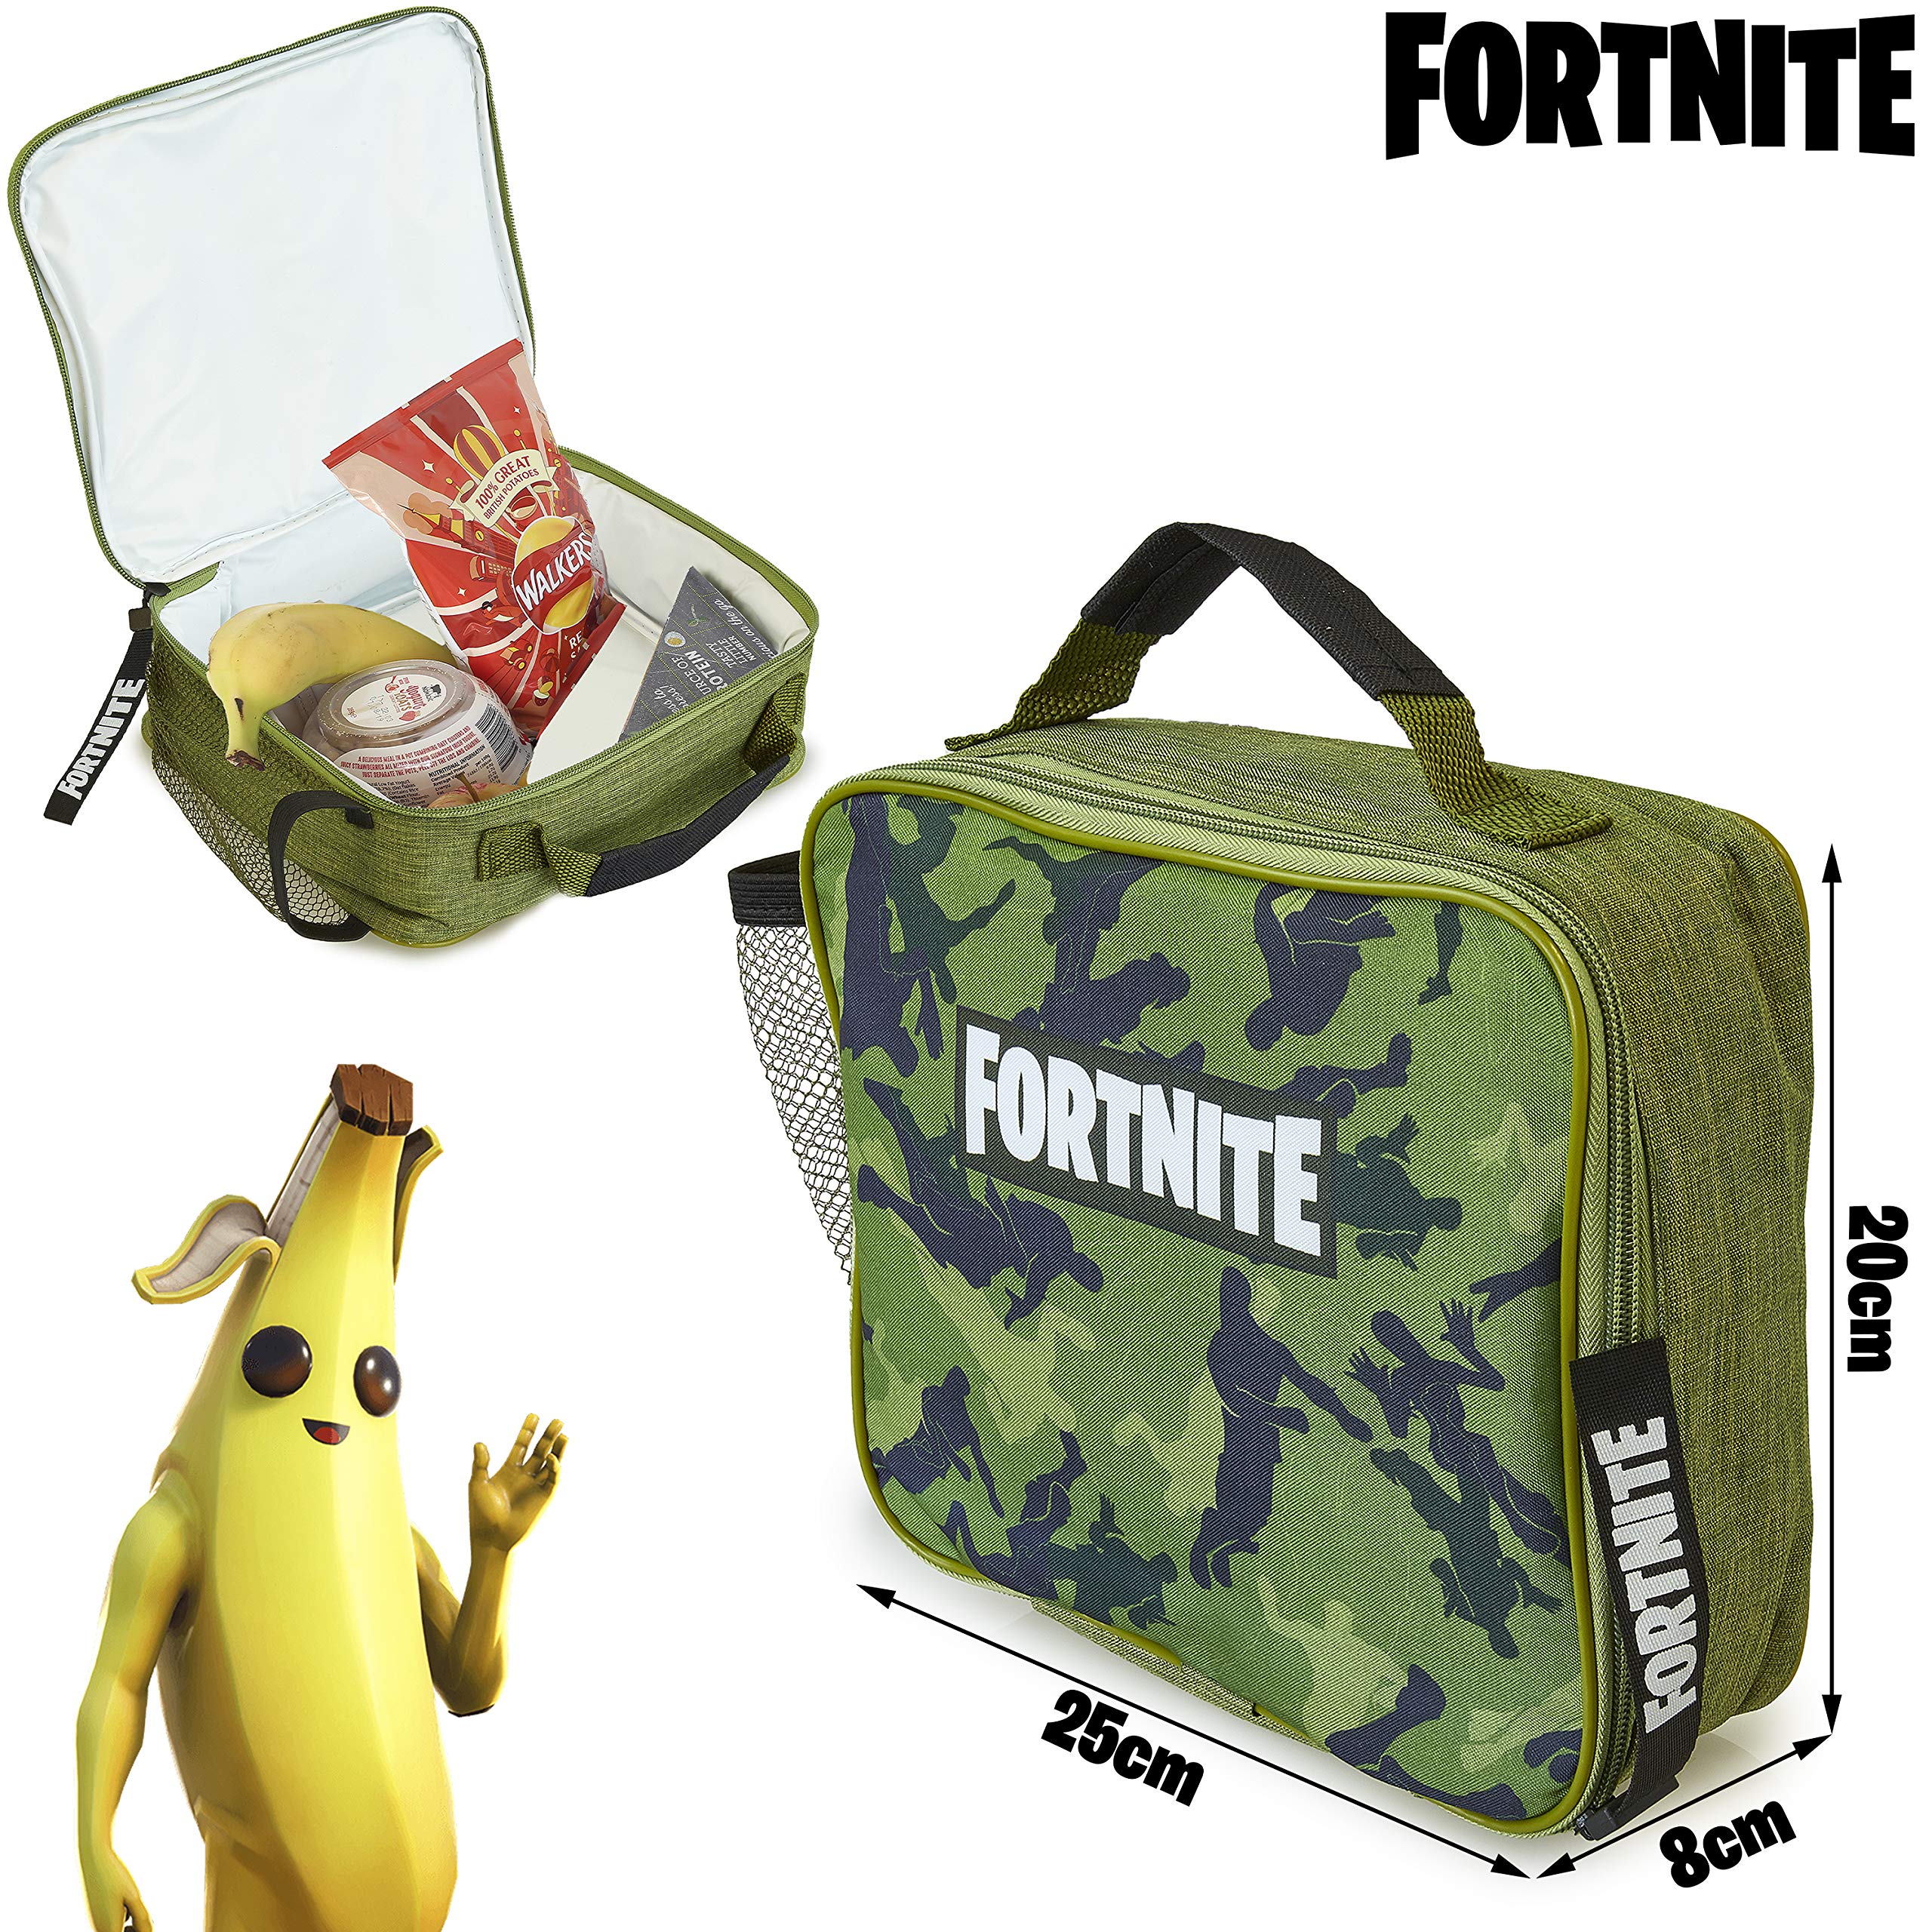 Best Fortnite Backpacks And Lunchboxes For Kids This Year: The 10 Must-Have Items for Fans